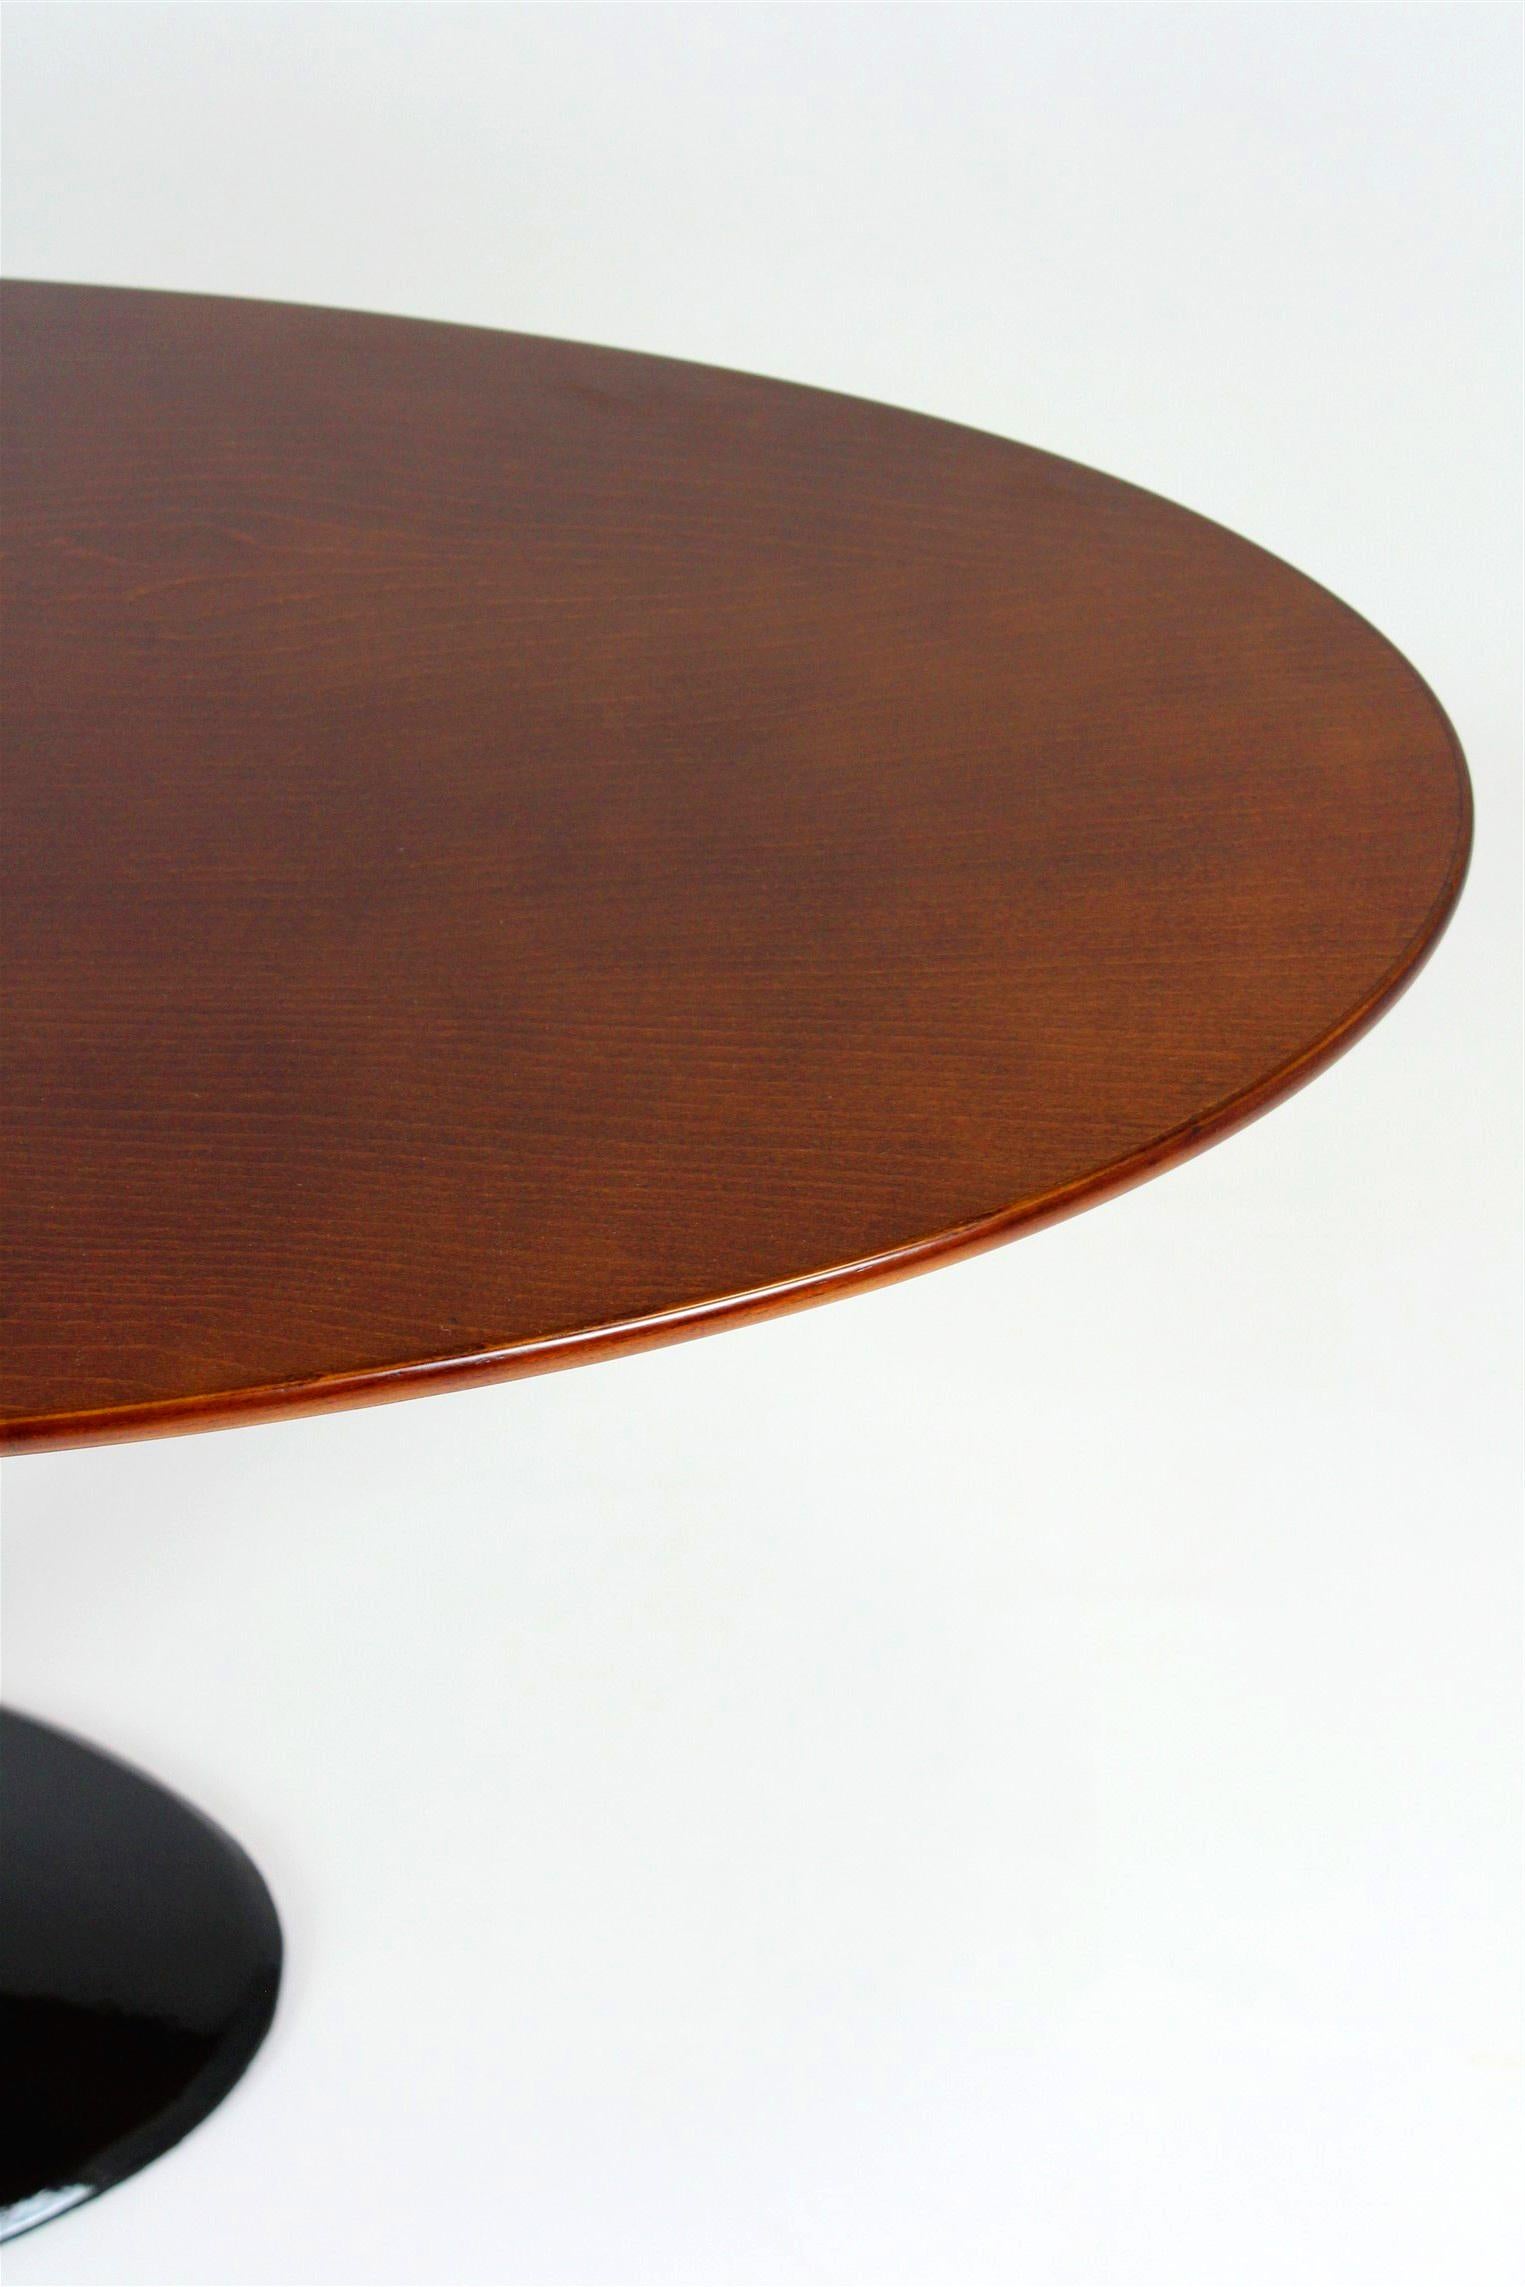 Restored Mid-Century Modern Oval Ash Coffee Table from Drevotvar, 1960s For Sale 5